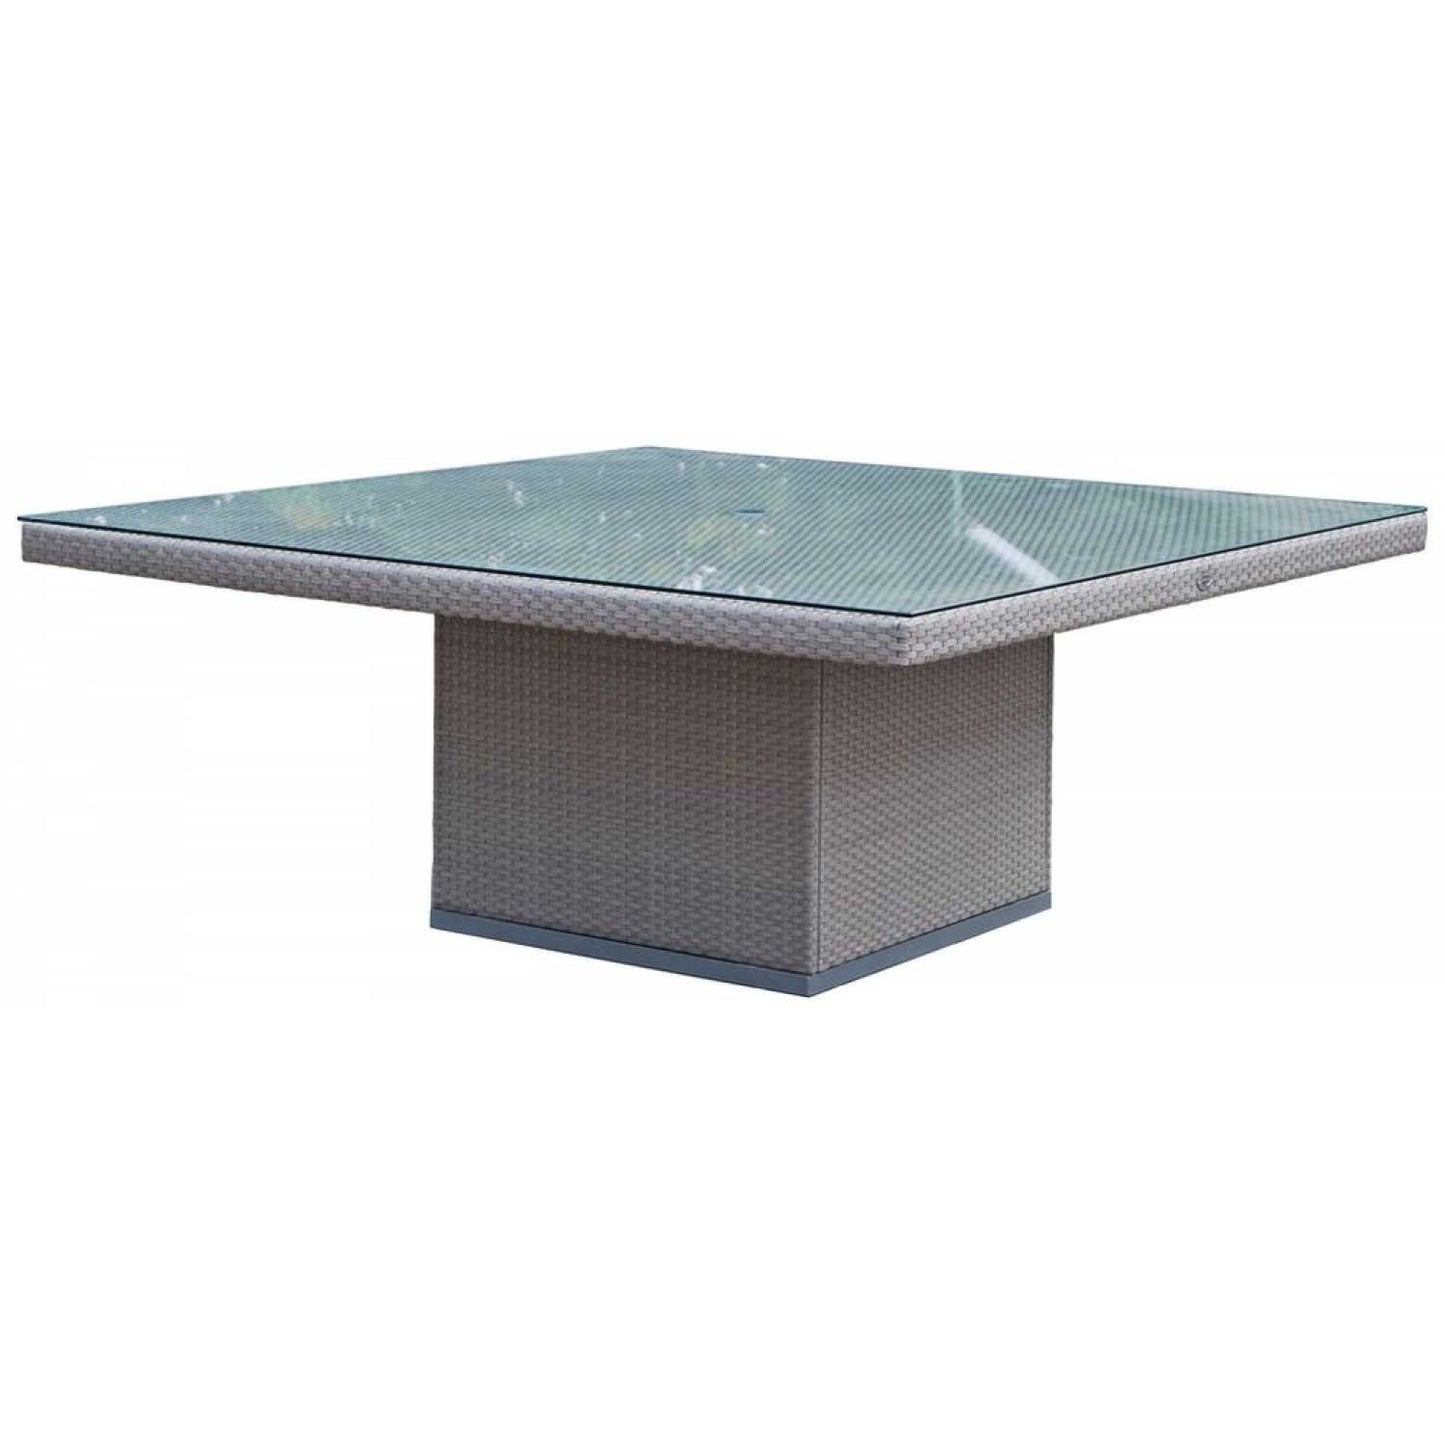 Pacific Silver Walnut Square Dining Table - PadioLiving - Pacific Silver Walnut Square Dining Table - Outdoor Dining Table - Square 2/4 Seat Table - PadioLiving